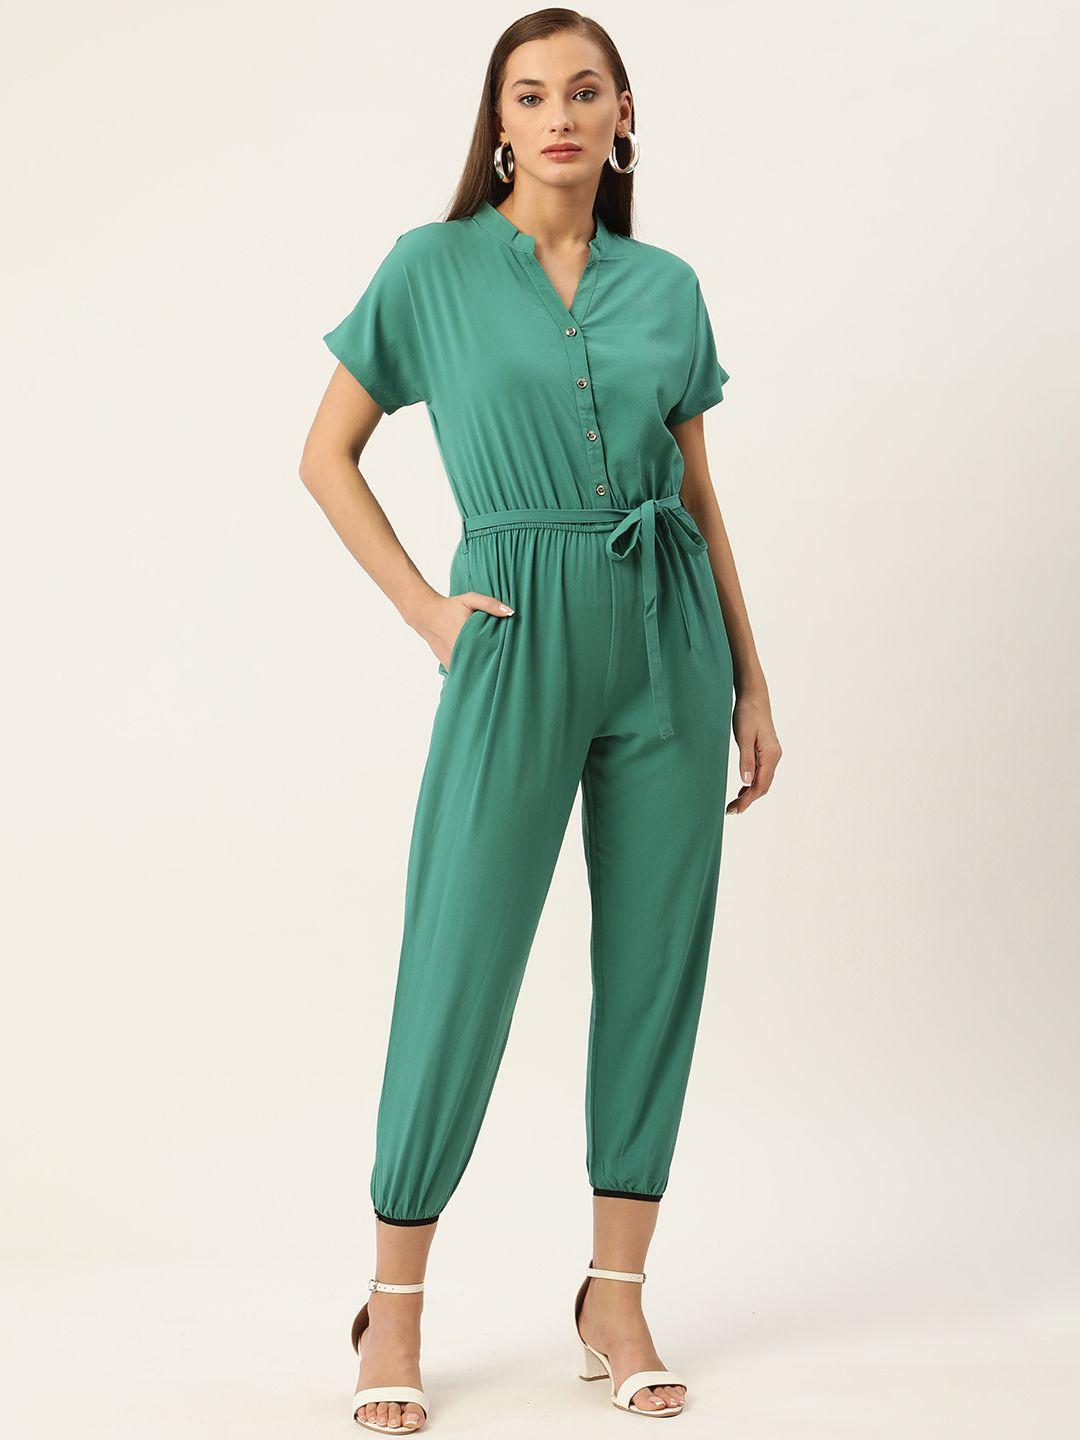 rue collection green belted basic jumpsuit